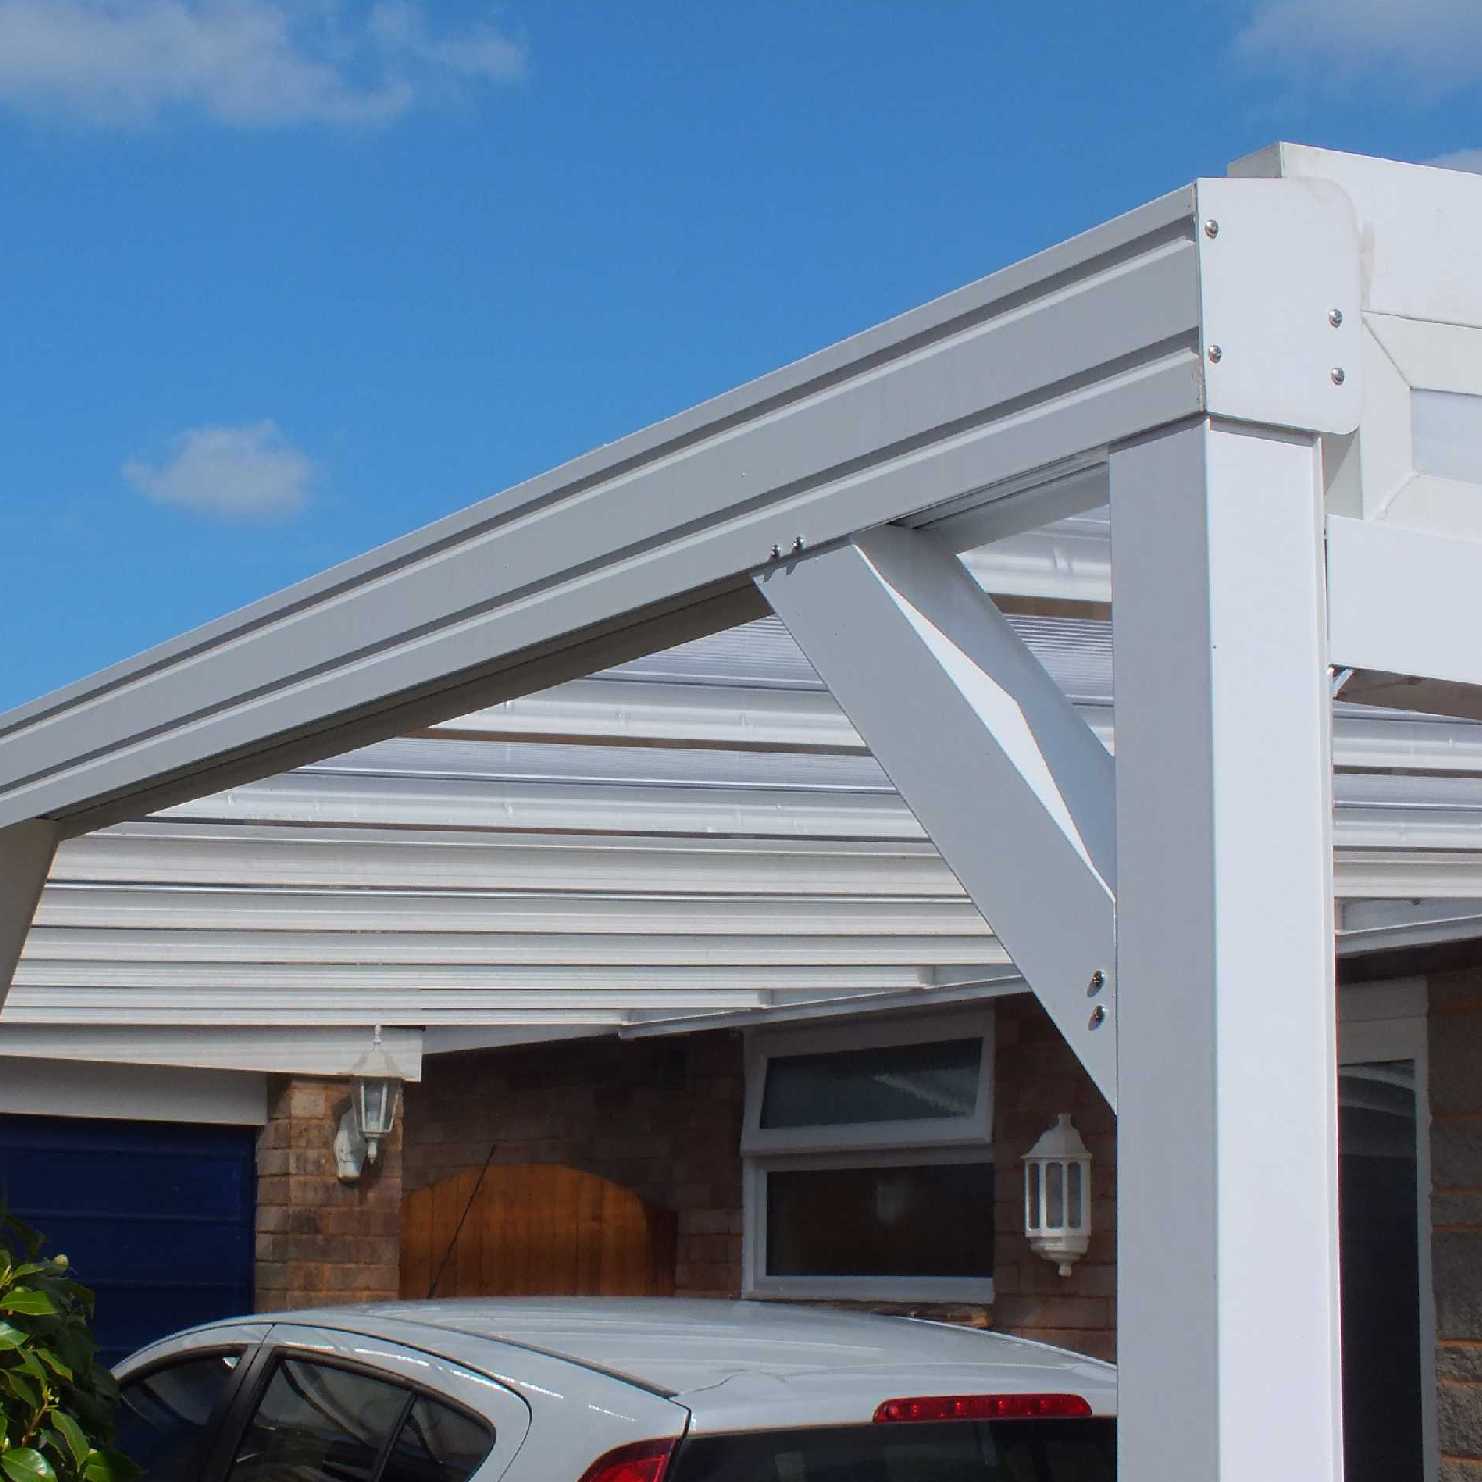 Buy Omega Smart Lean-To Canopy, White with 16mm Polycarbonate Glazing - 4.9m (W) x 4.0m (P), (3) Supporting Posts online today